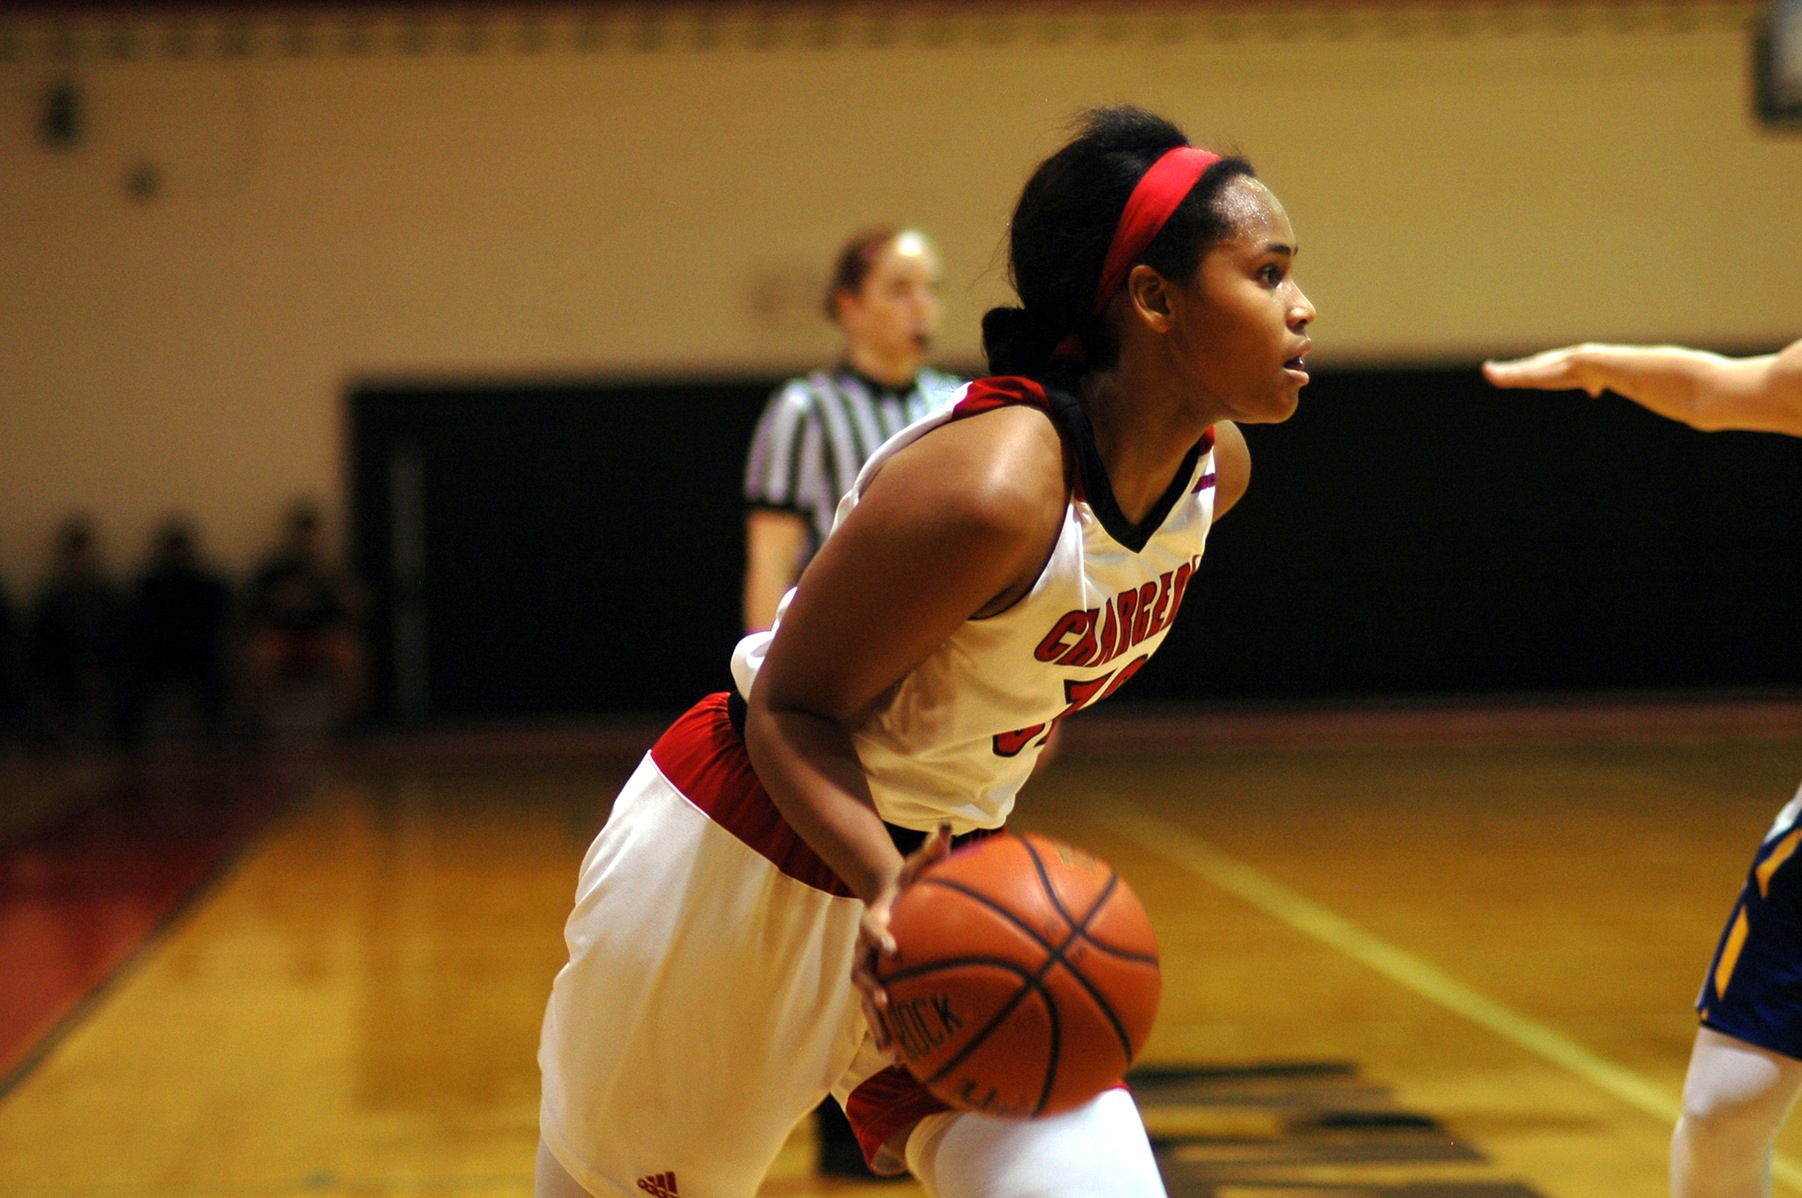 LADY CHARGERS OVERMATCHED BY SCSU OWLS